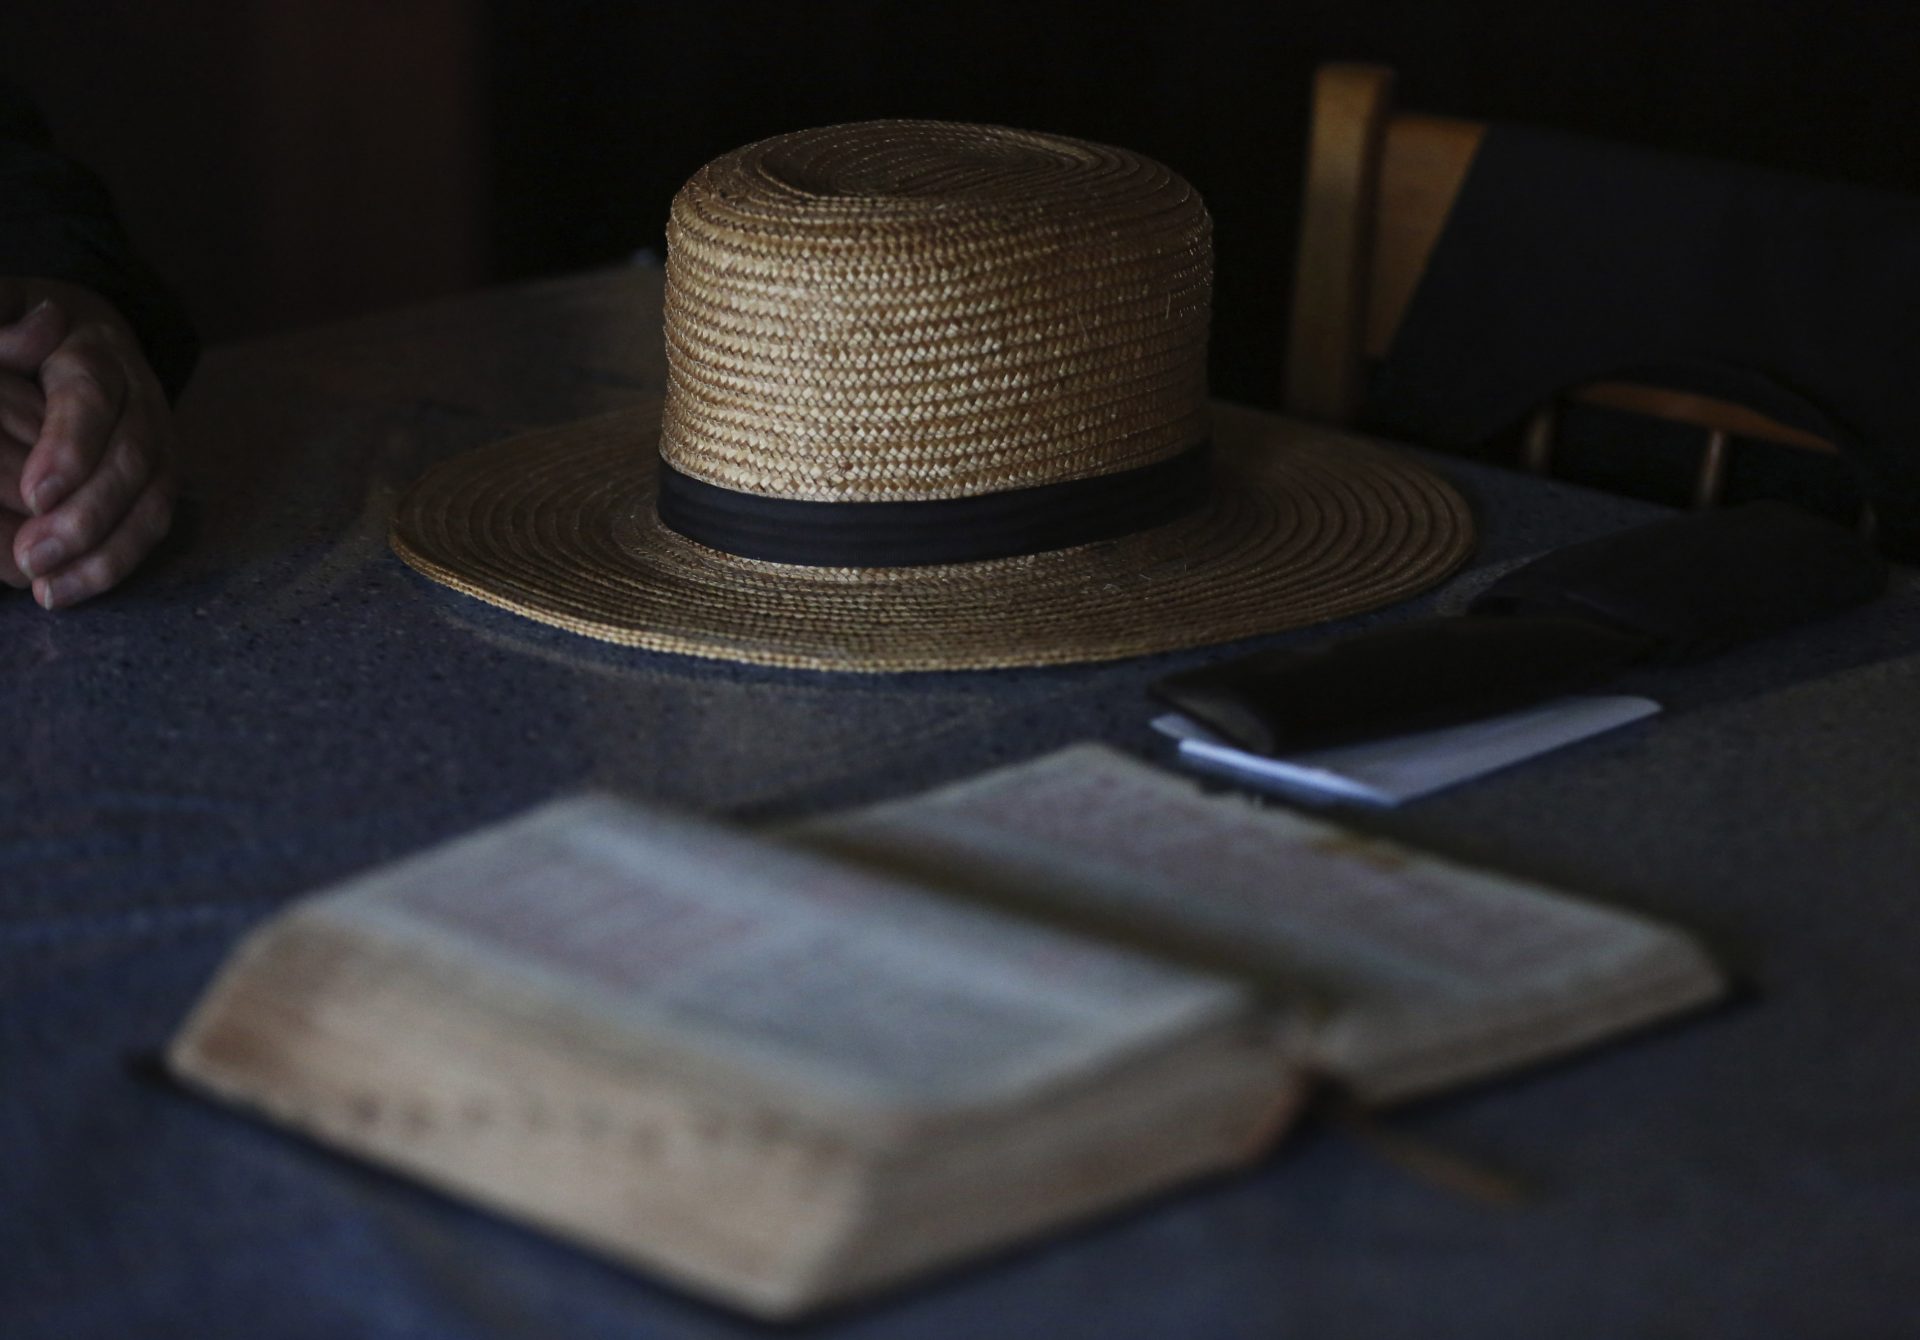 In this Saturday, May 16, 2020, photo, Bishop Marvin's straw hat sits on his living room table next to his Bible in German as he prepares for the Sunday service in Ephrata, Pa. The Old Order Stauffer Church, which shuns most modern technology including the internet, telephones and cars, has been isolated in the Mennonite Valley without church service as it followed the state's COVID-19 stay-at-home order. Gov. Tom Wolf's order exempted religious activity, but strongly discouraged gatherings. (